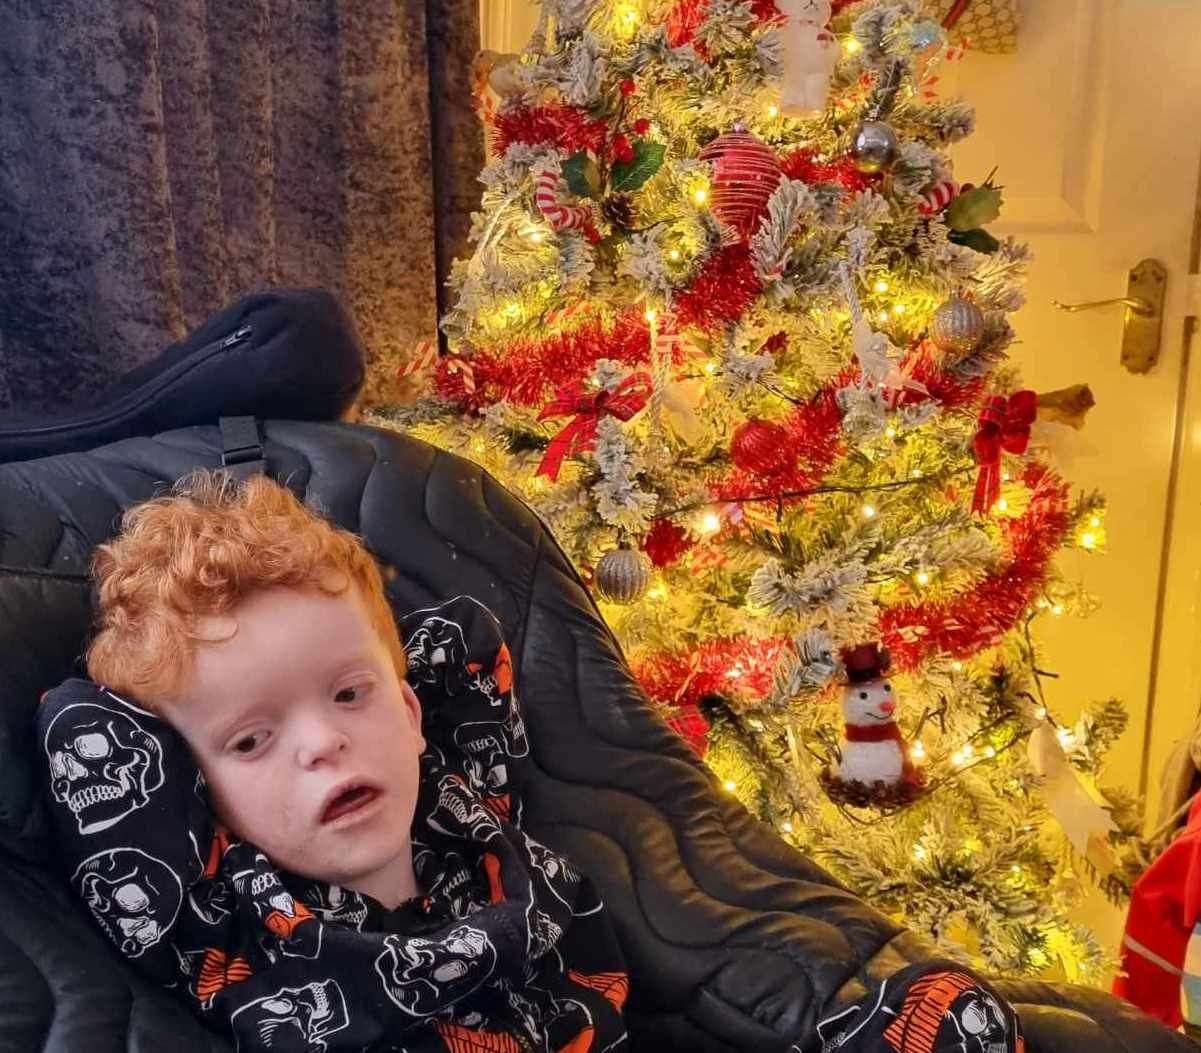 Carter has been discharged and is ready to celebrate Christmas at home with his familyPicture: Leigh-Anne Gates